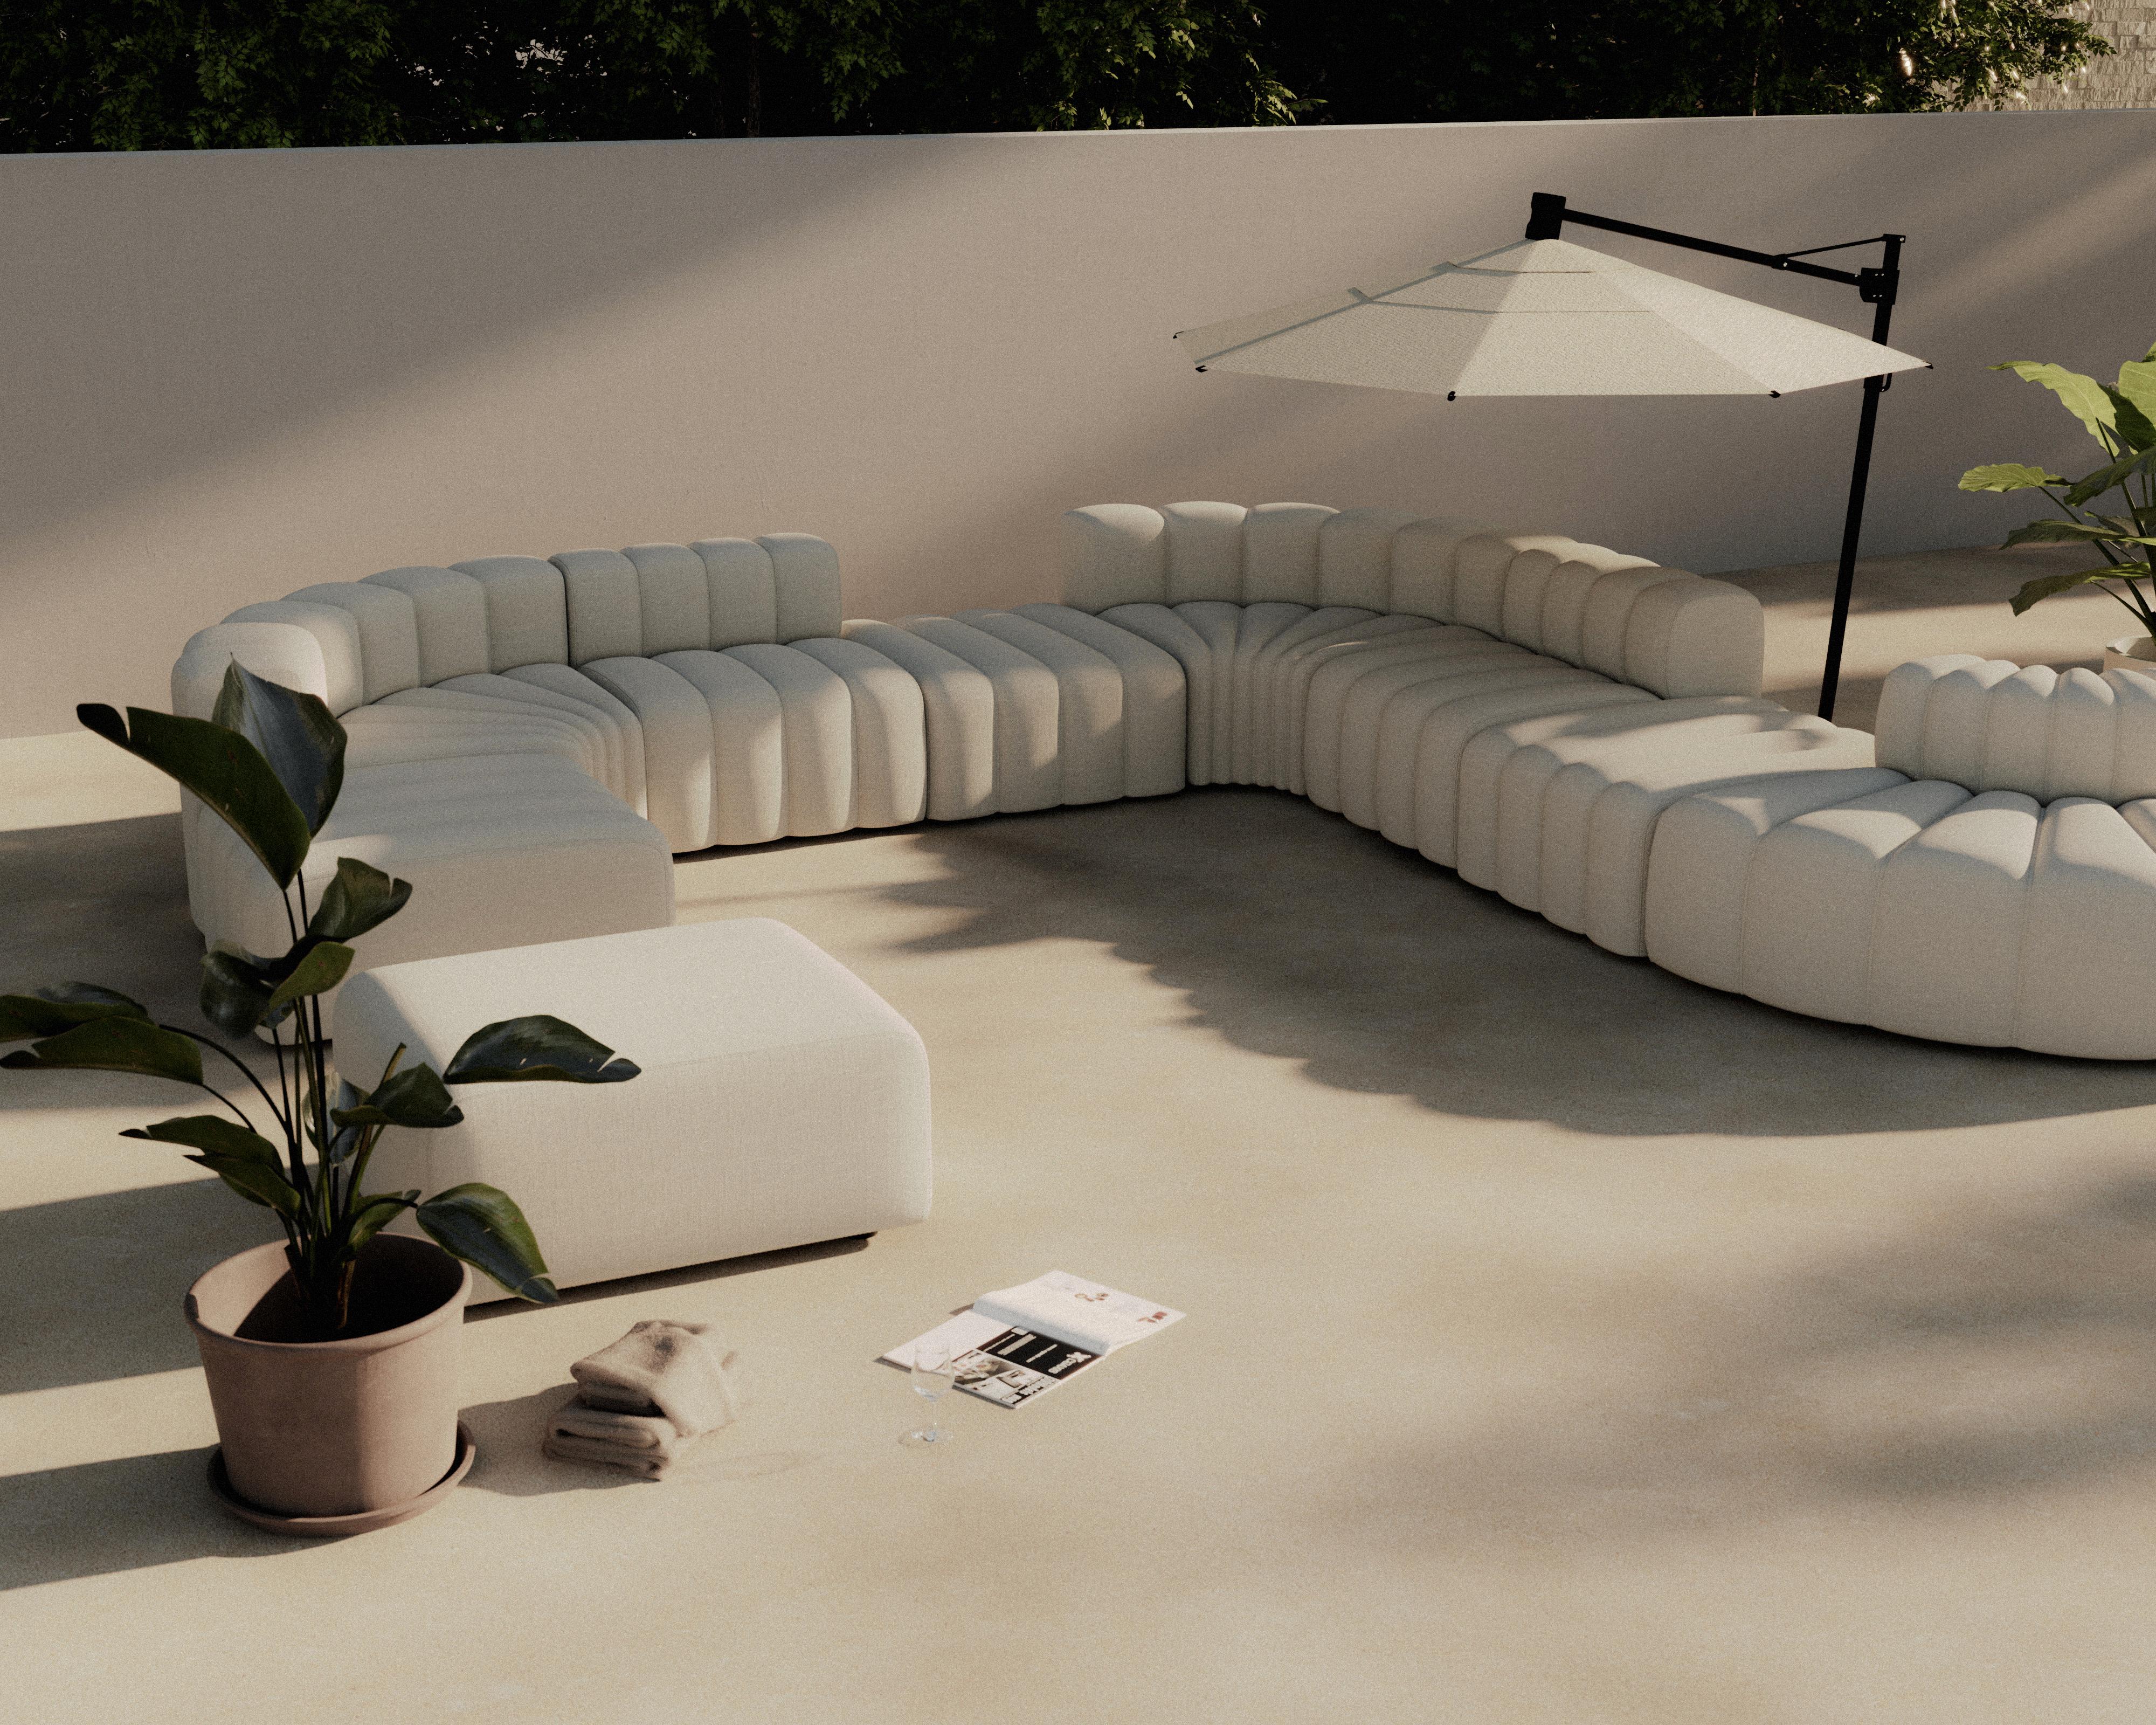 Other Studio Large Modular Outdoor Sofa by NORR11 For Sale